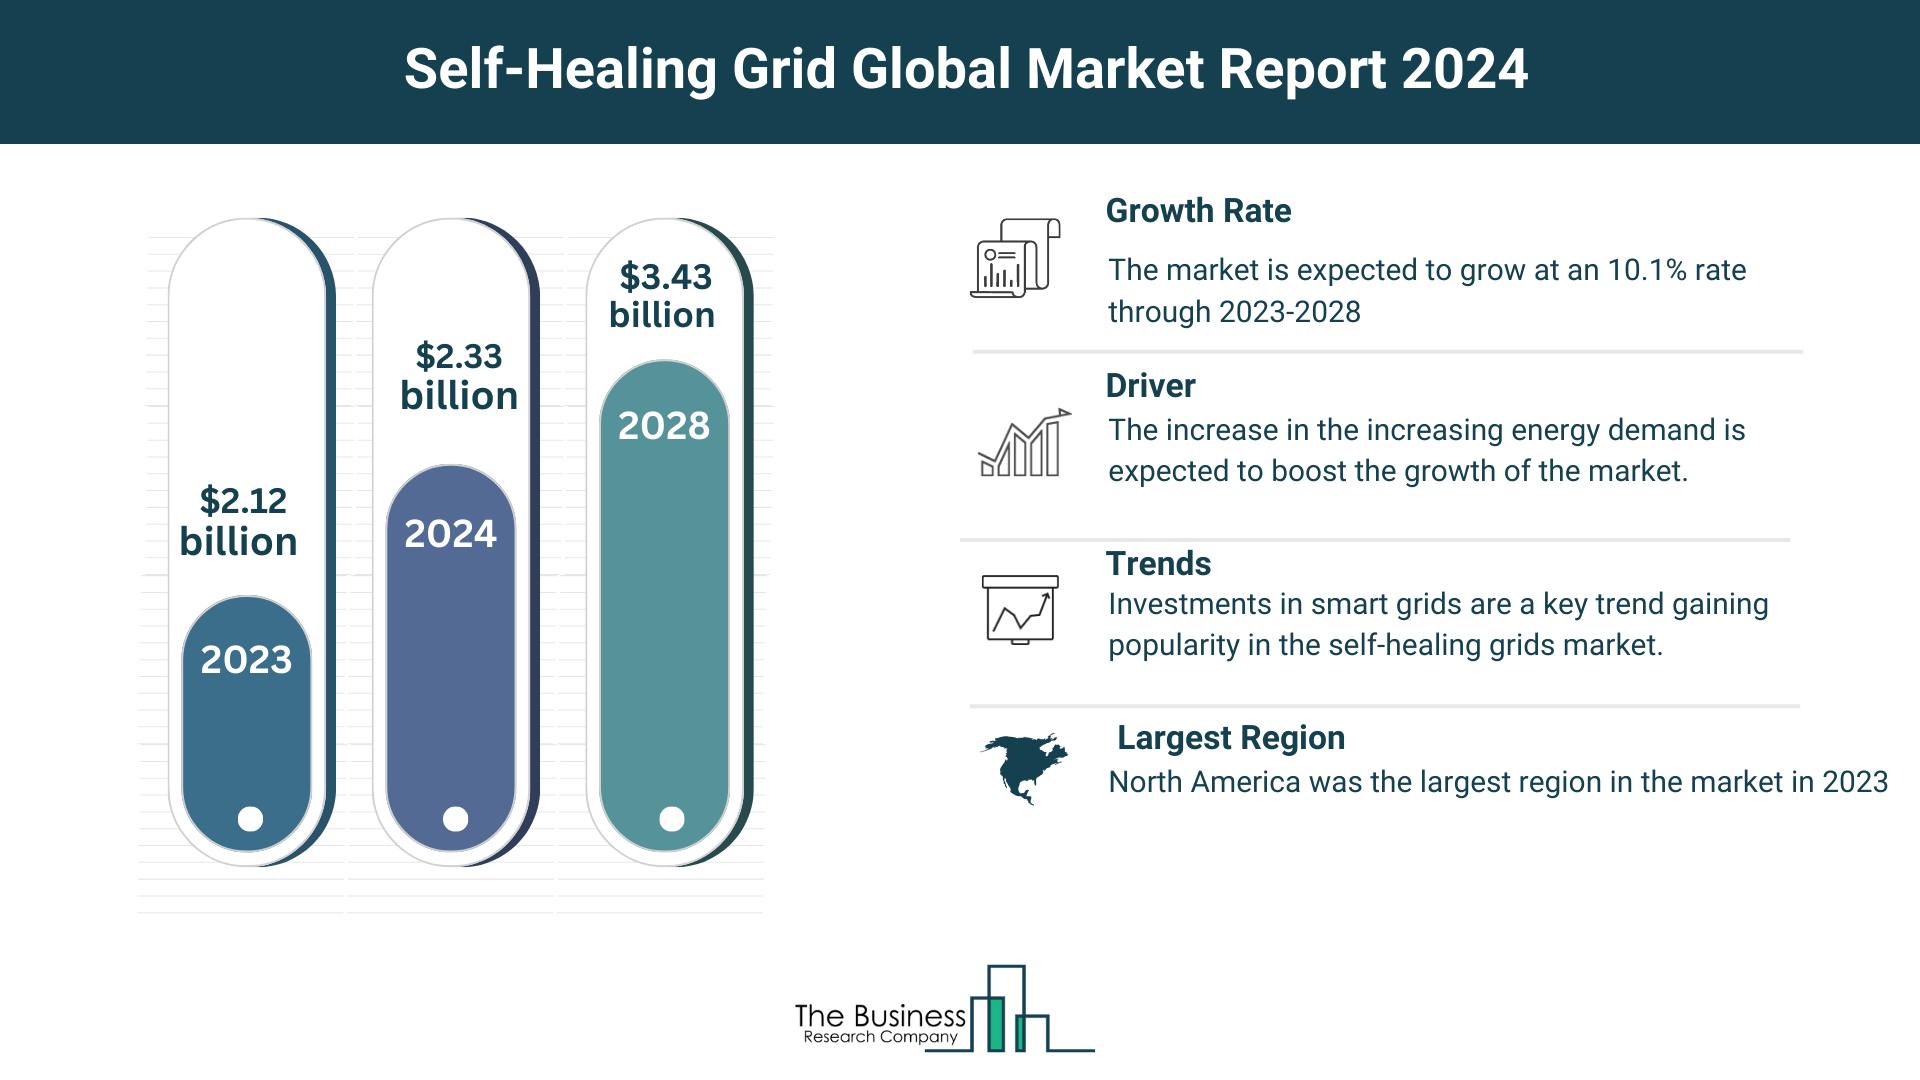 How Is the Self-Healing Grid Market Expected To Grow Through 2024-2033?